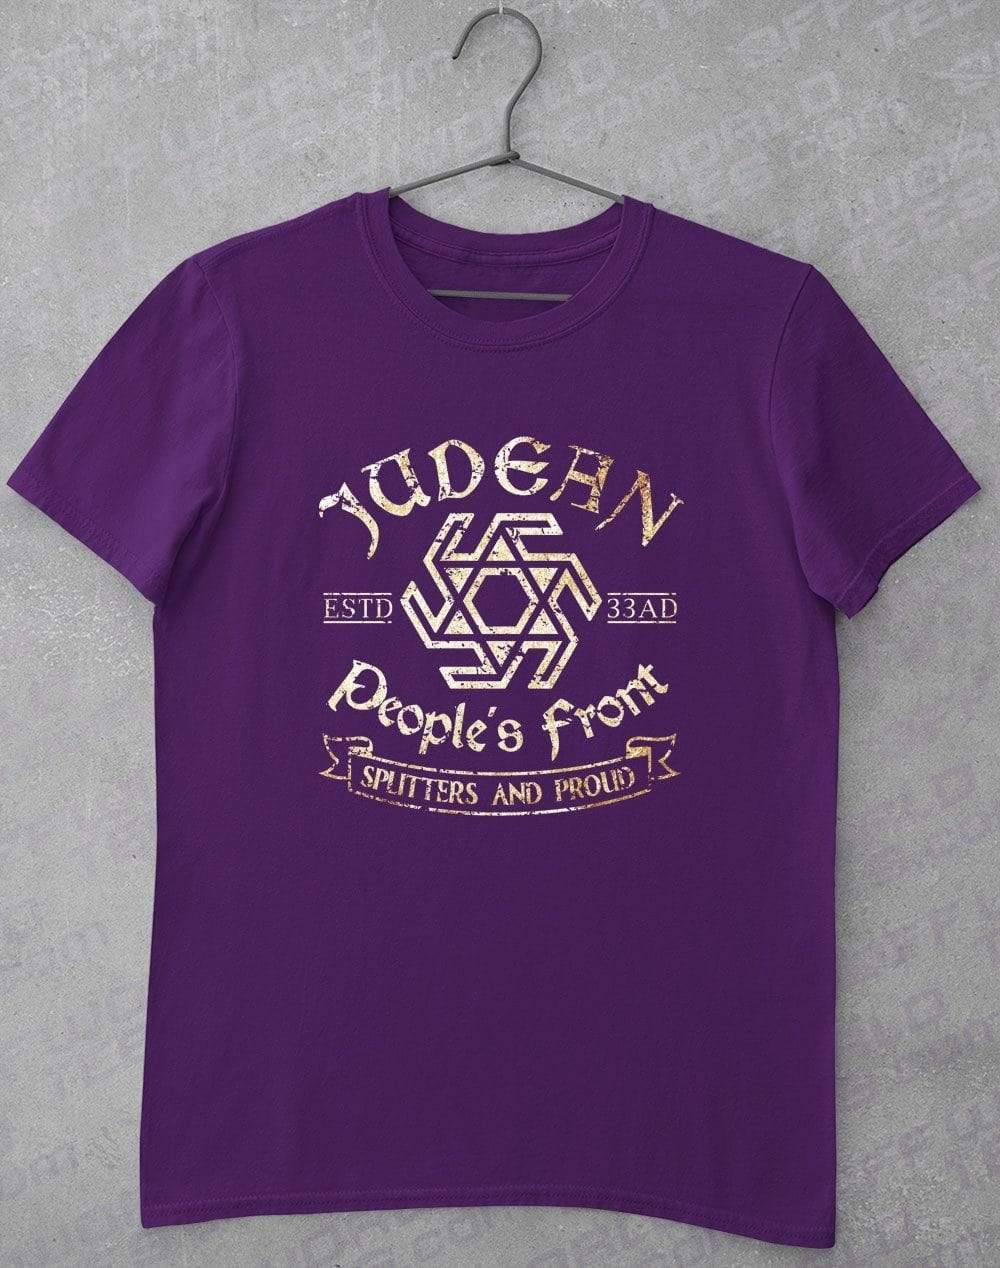 Judean People's Front T Shirt S / Purple  - Off World Tees